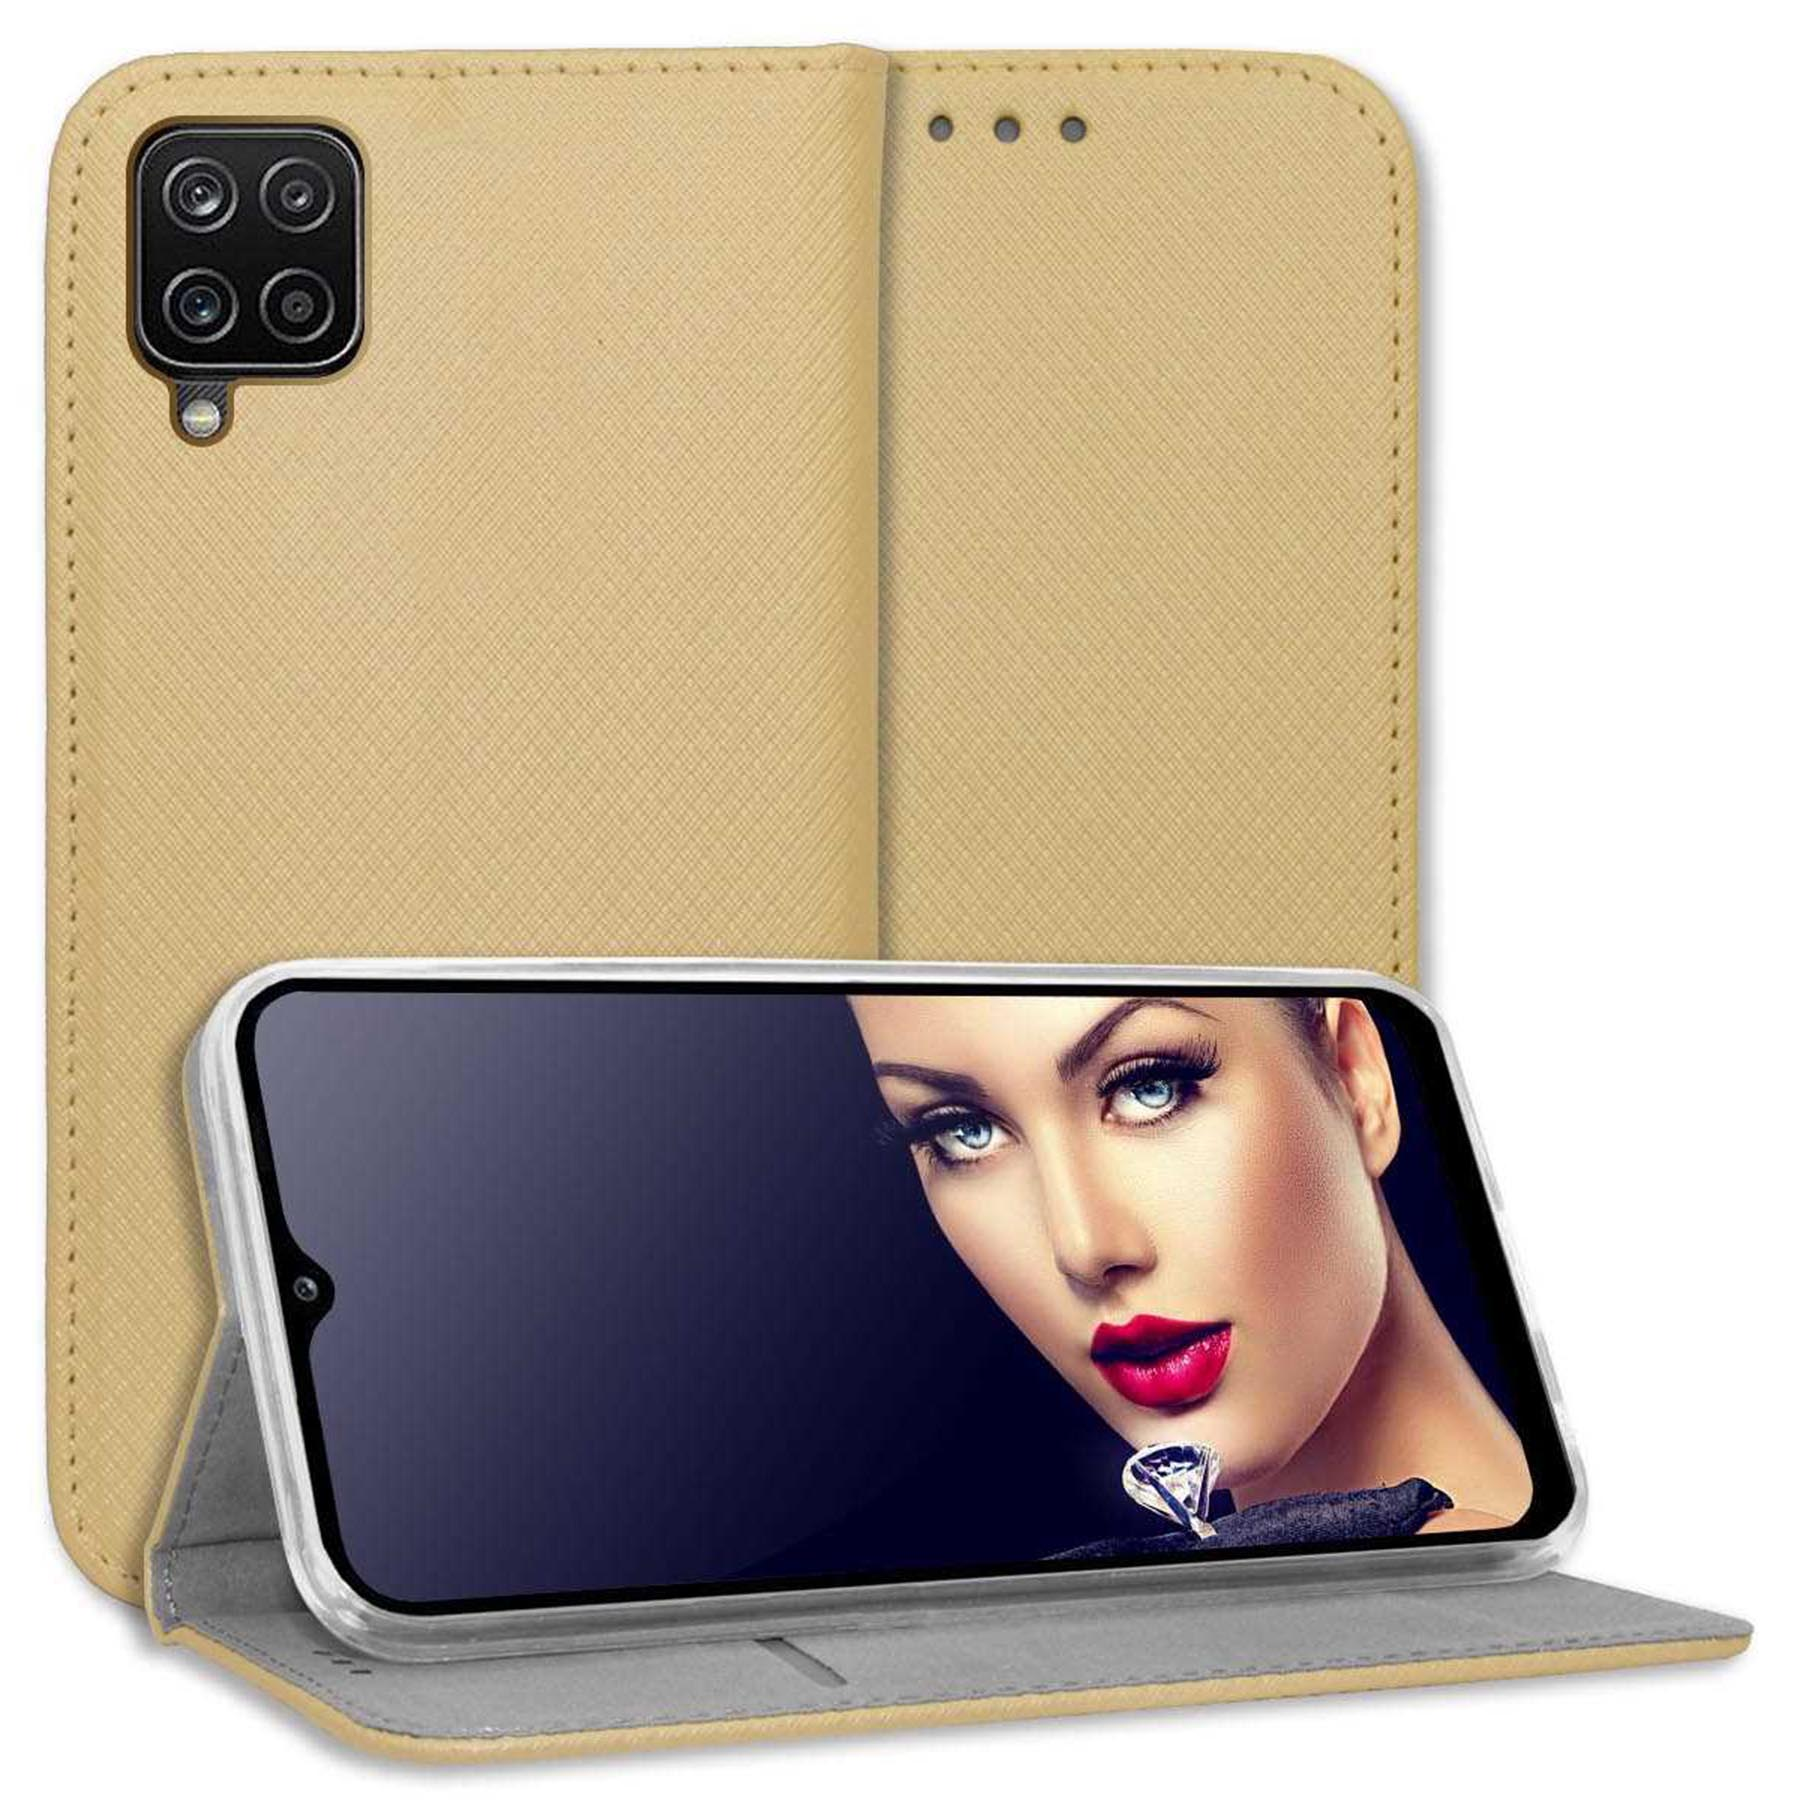 Magnet Galaxy A22 Samsung, Bookcover, Klapphülle, Smart ENERGY MORE MTB 4G, Gold